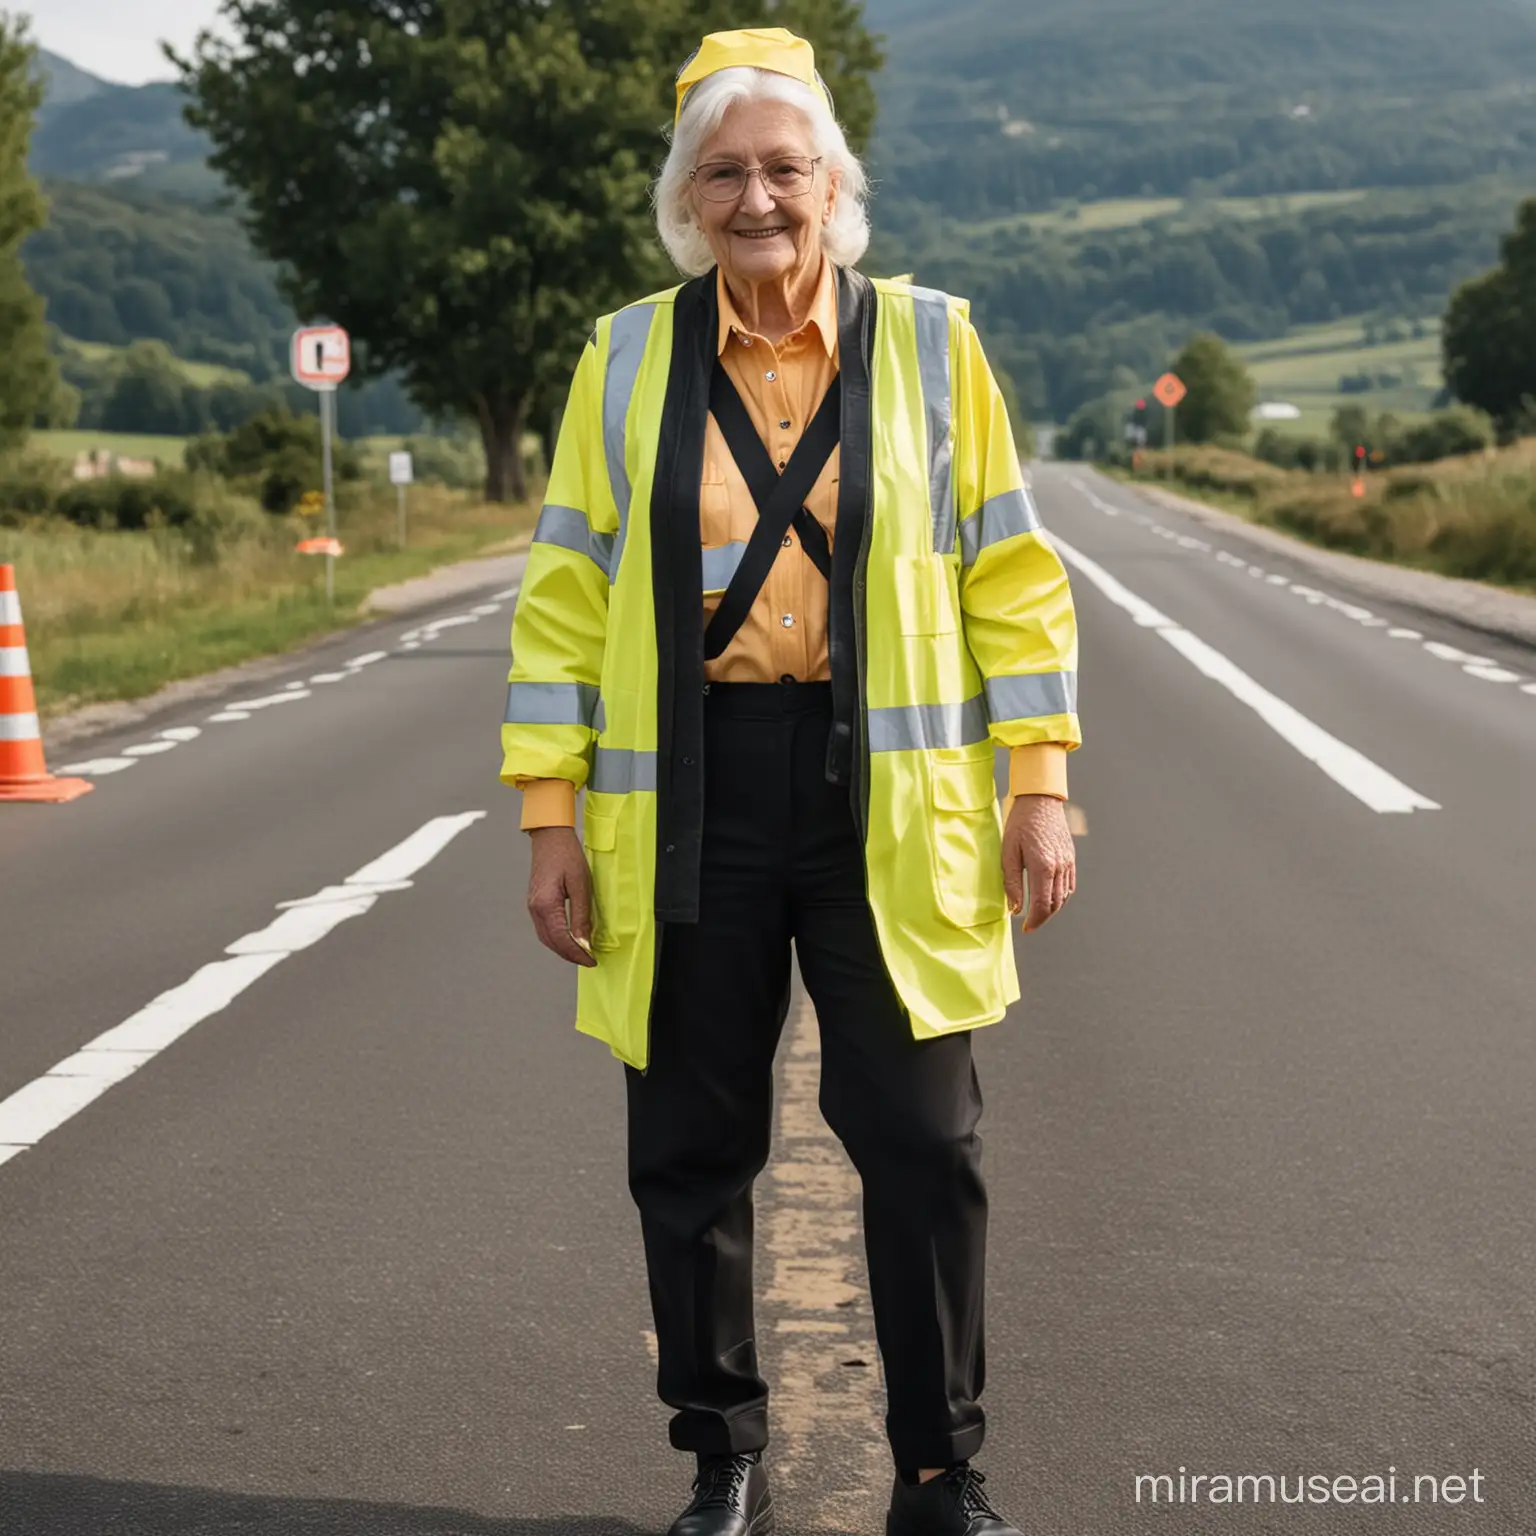 DESIGN AND DEVELOPMENT OF A REFLECTIVE GARMENT FOR ELDERLY INDIVIDUALS TO AID IN ROAD CROSSING